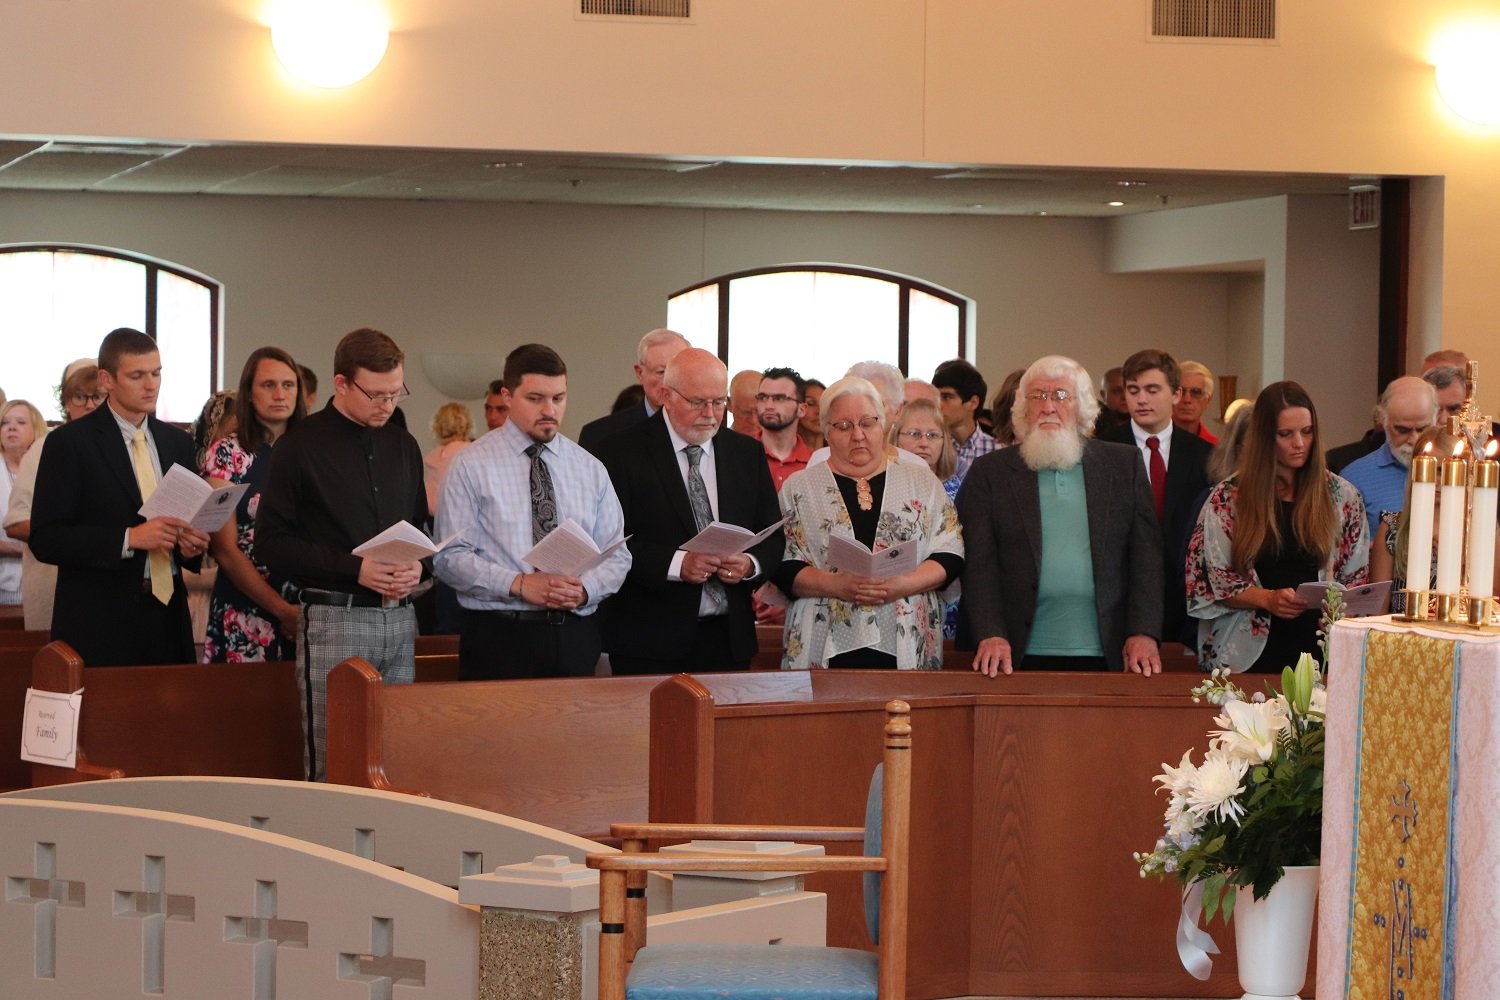  Some of Sr. Frances Marie’s family (front row). L-R: Jude and Abe (brothers), Dcn Matt and Mary (parents), Phillip (grandfather), and Andrea (aunt)  Not visible in this photo: Beatrix and Josephine (cousins) and Katie (sister-in-law) 